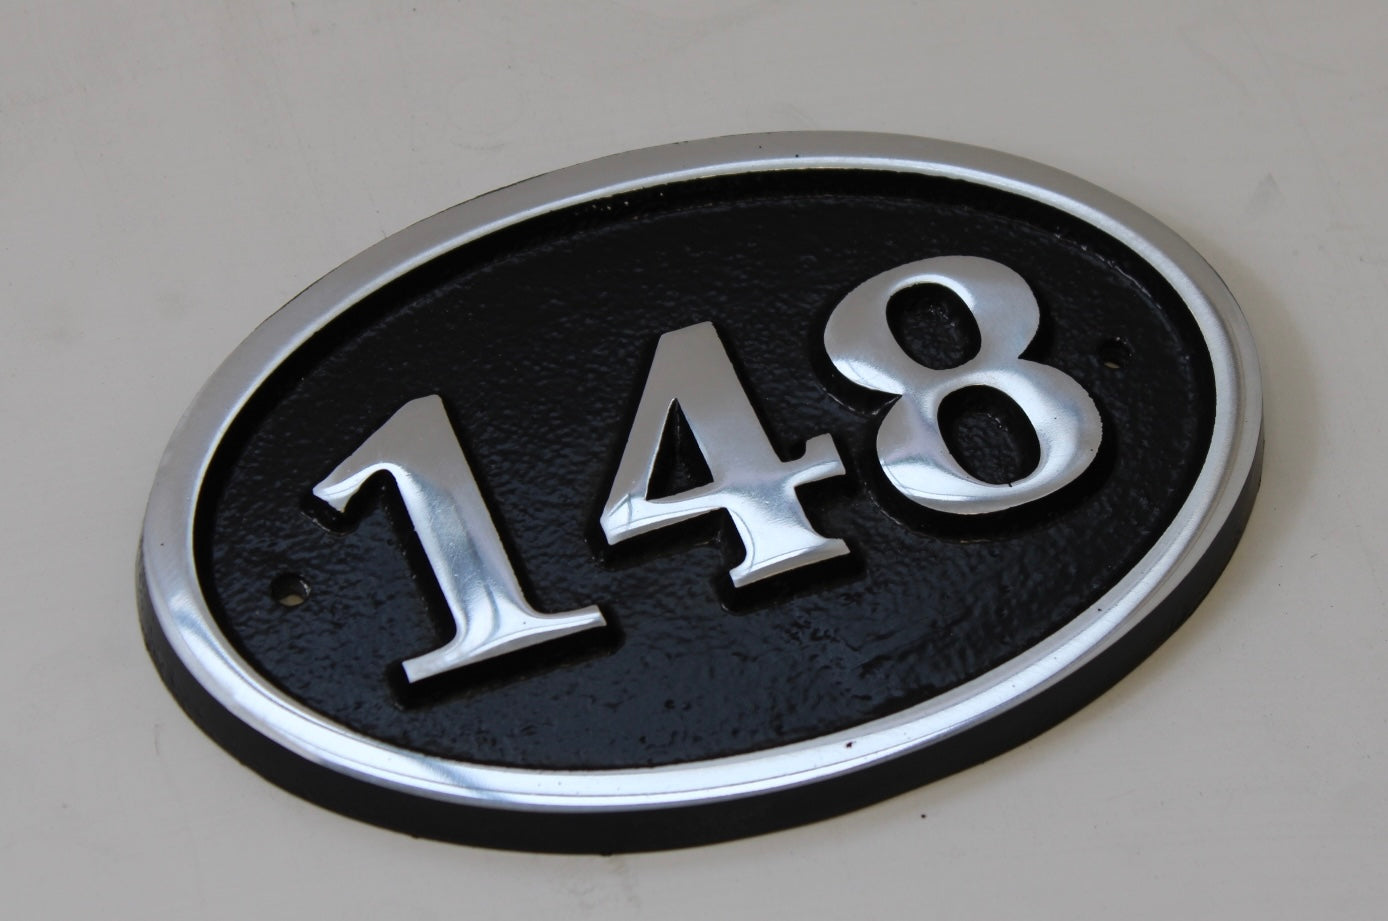 house number sign oval in black